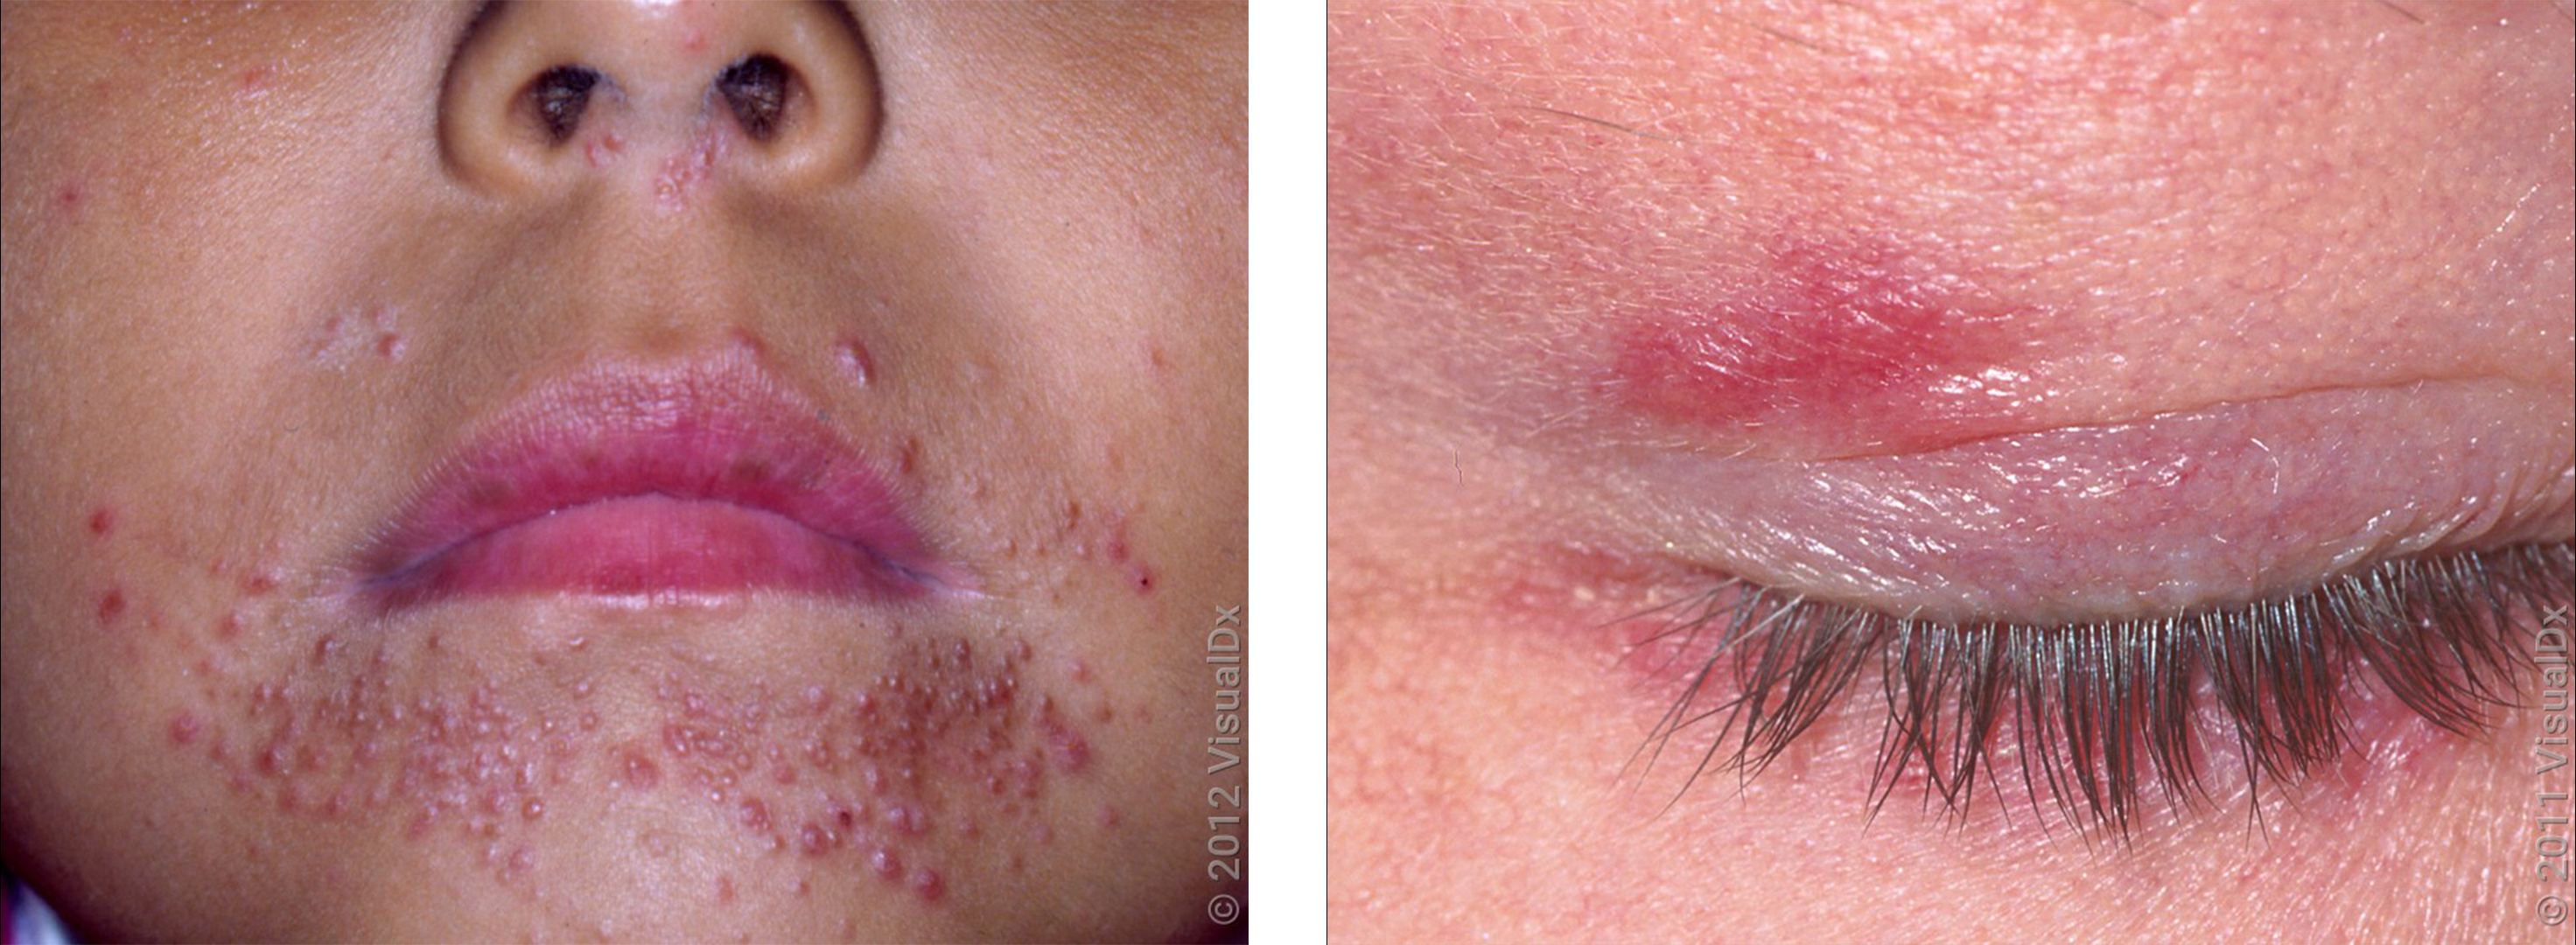 Left: Small, pink scaly bumps around the mouth and nose in perioral dermatitis. Right: Small, pink bumps on the upper eyelid in perioral dermatitis. 